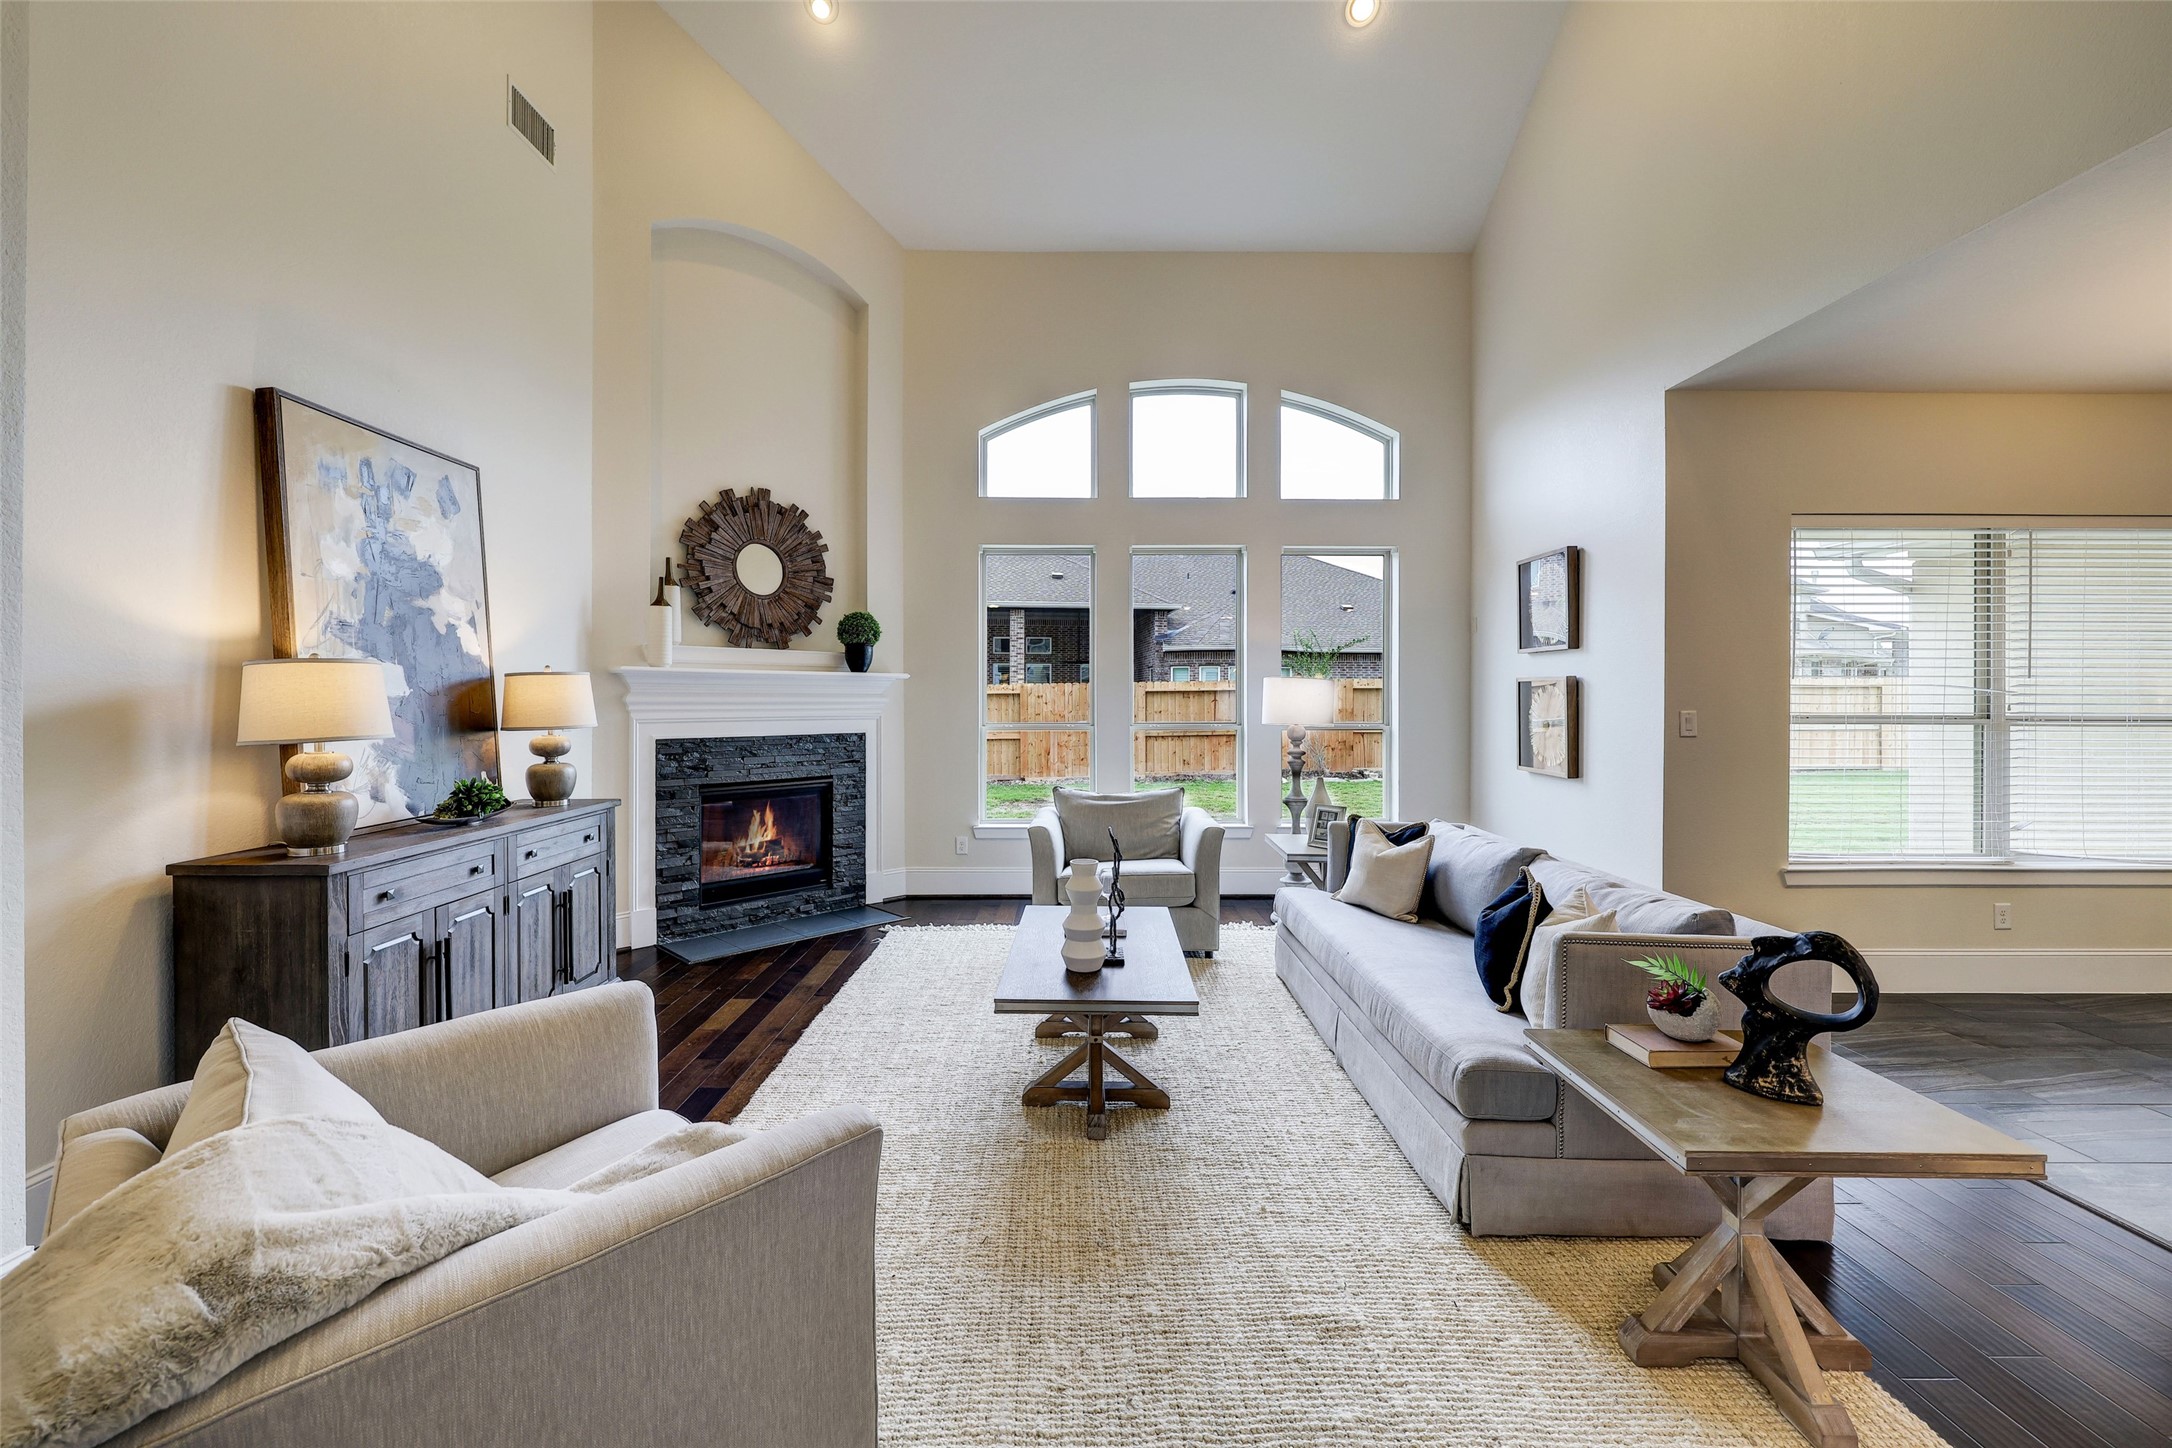 Balanced modern living for rest, play and relaxation is all right here, complete with built-ins and bright open sightlines to the backyard. The stylish fireplace provides warmth when the weather is cooler.